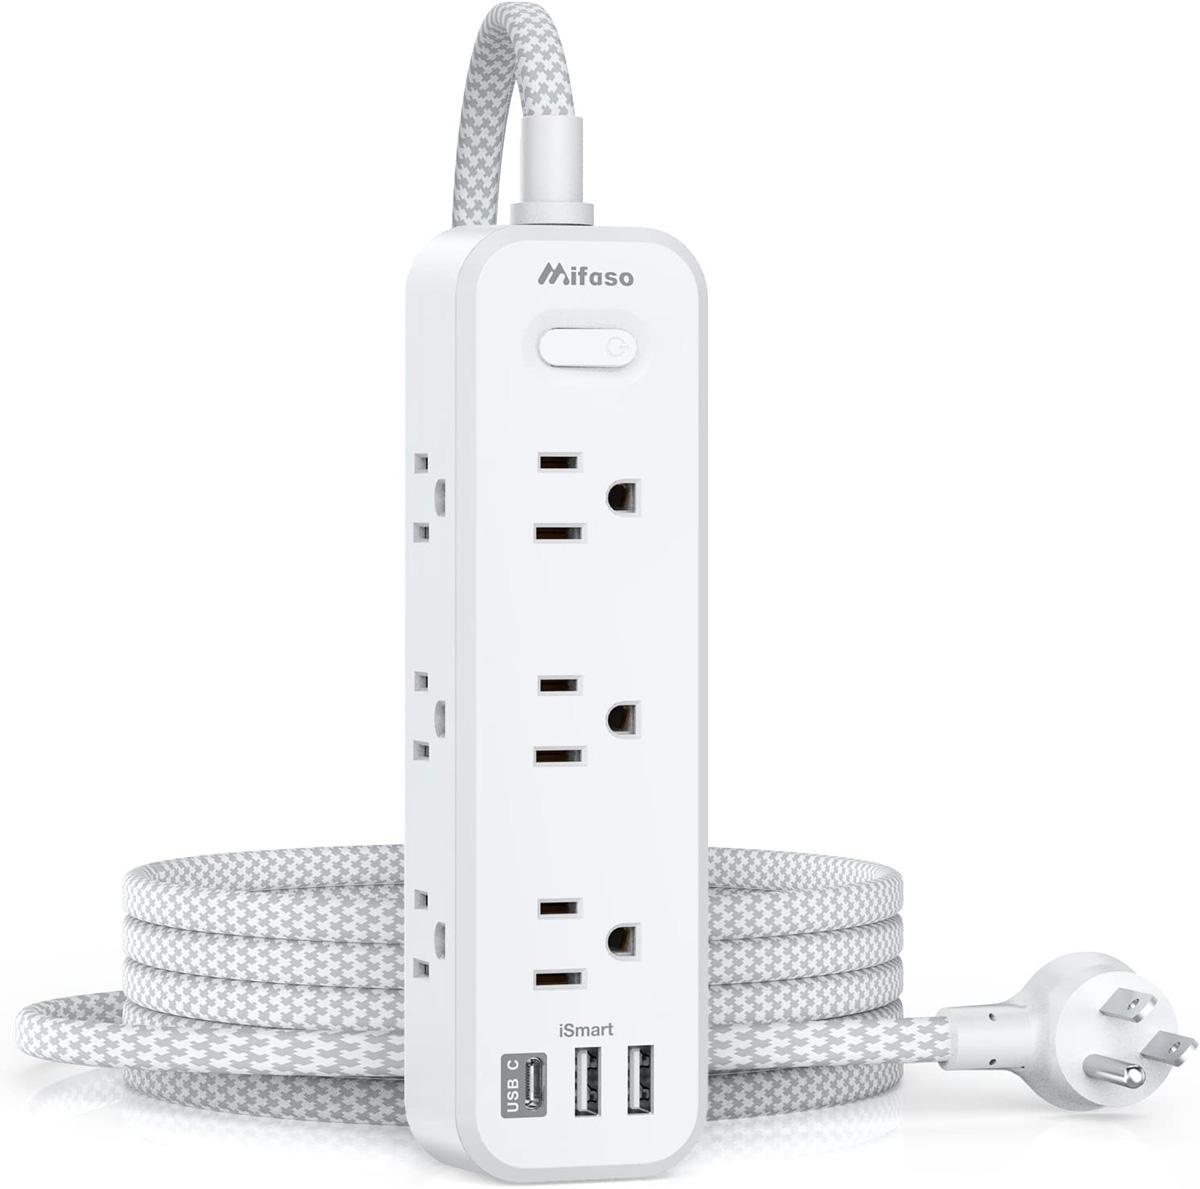 Mifaso 9-Outlet Power Strip Surge Protector for $12.47